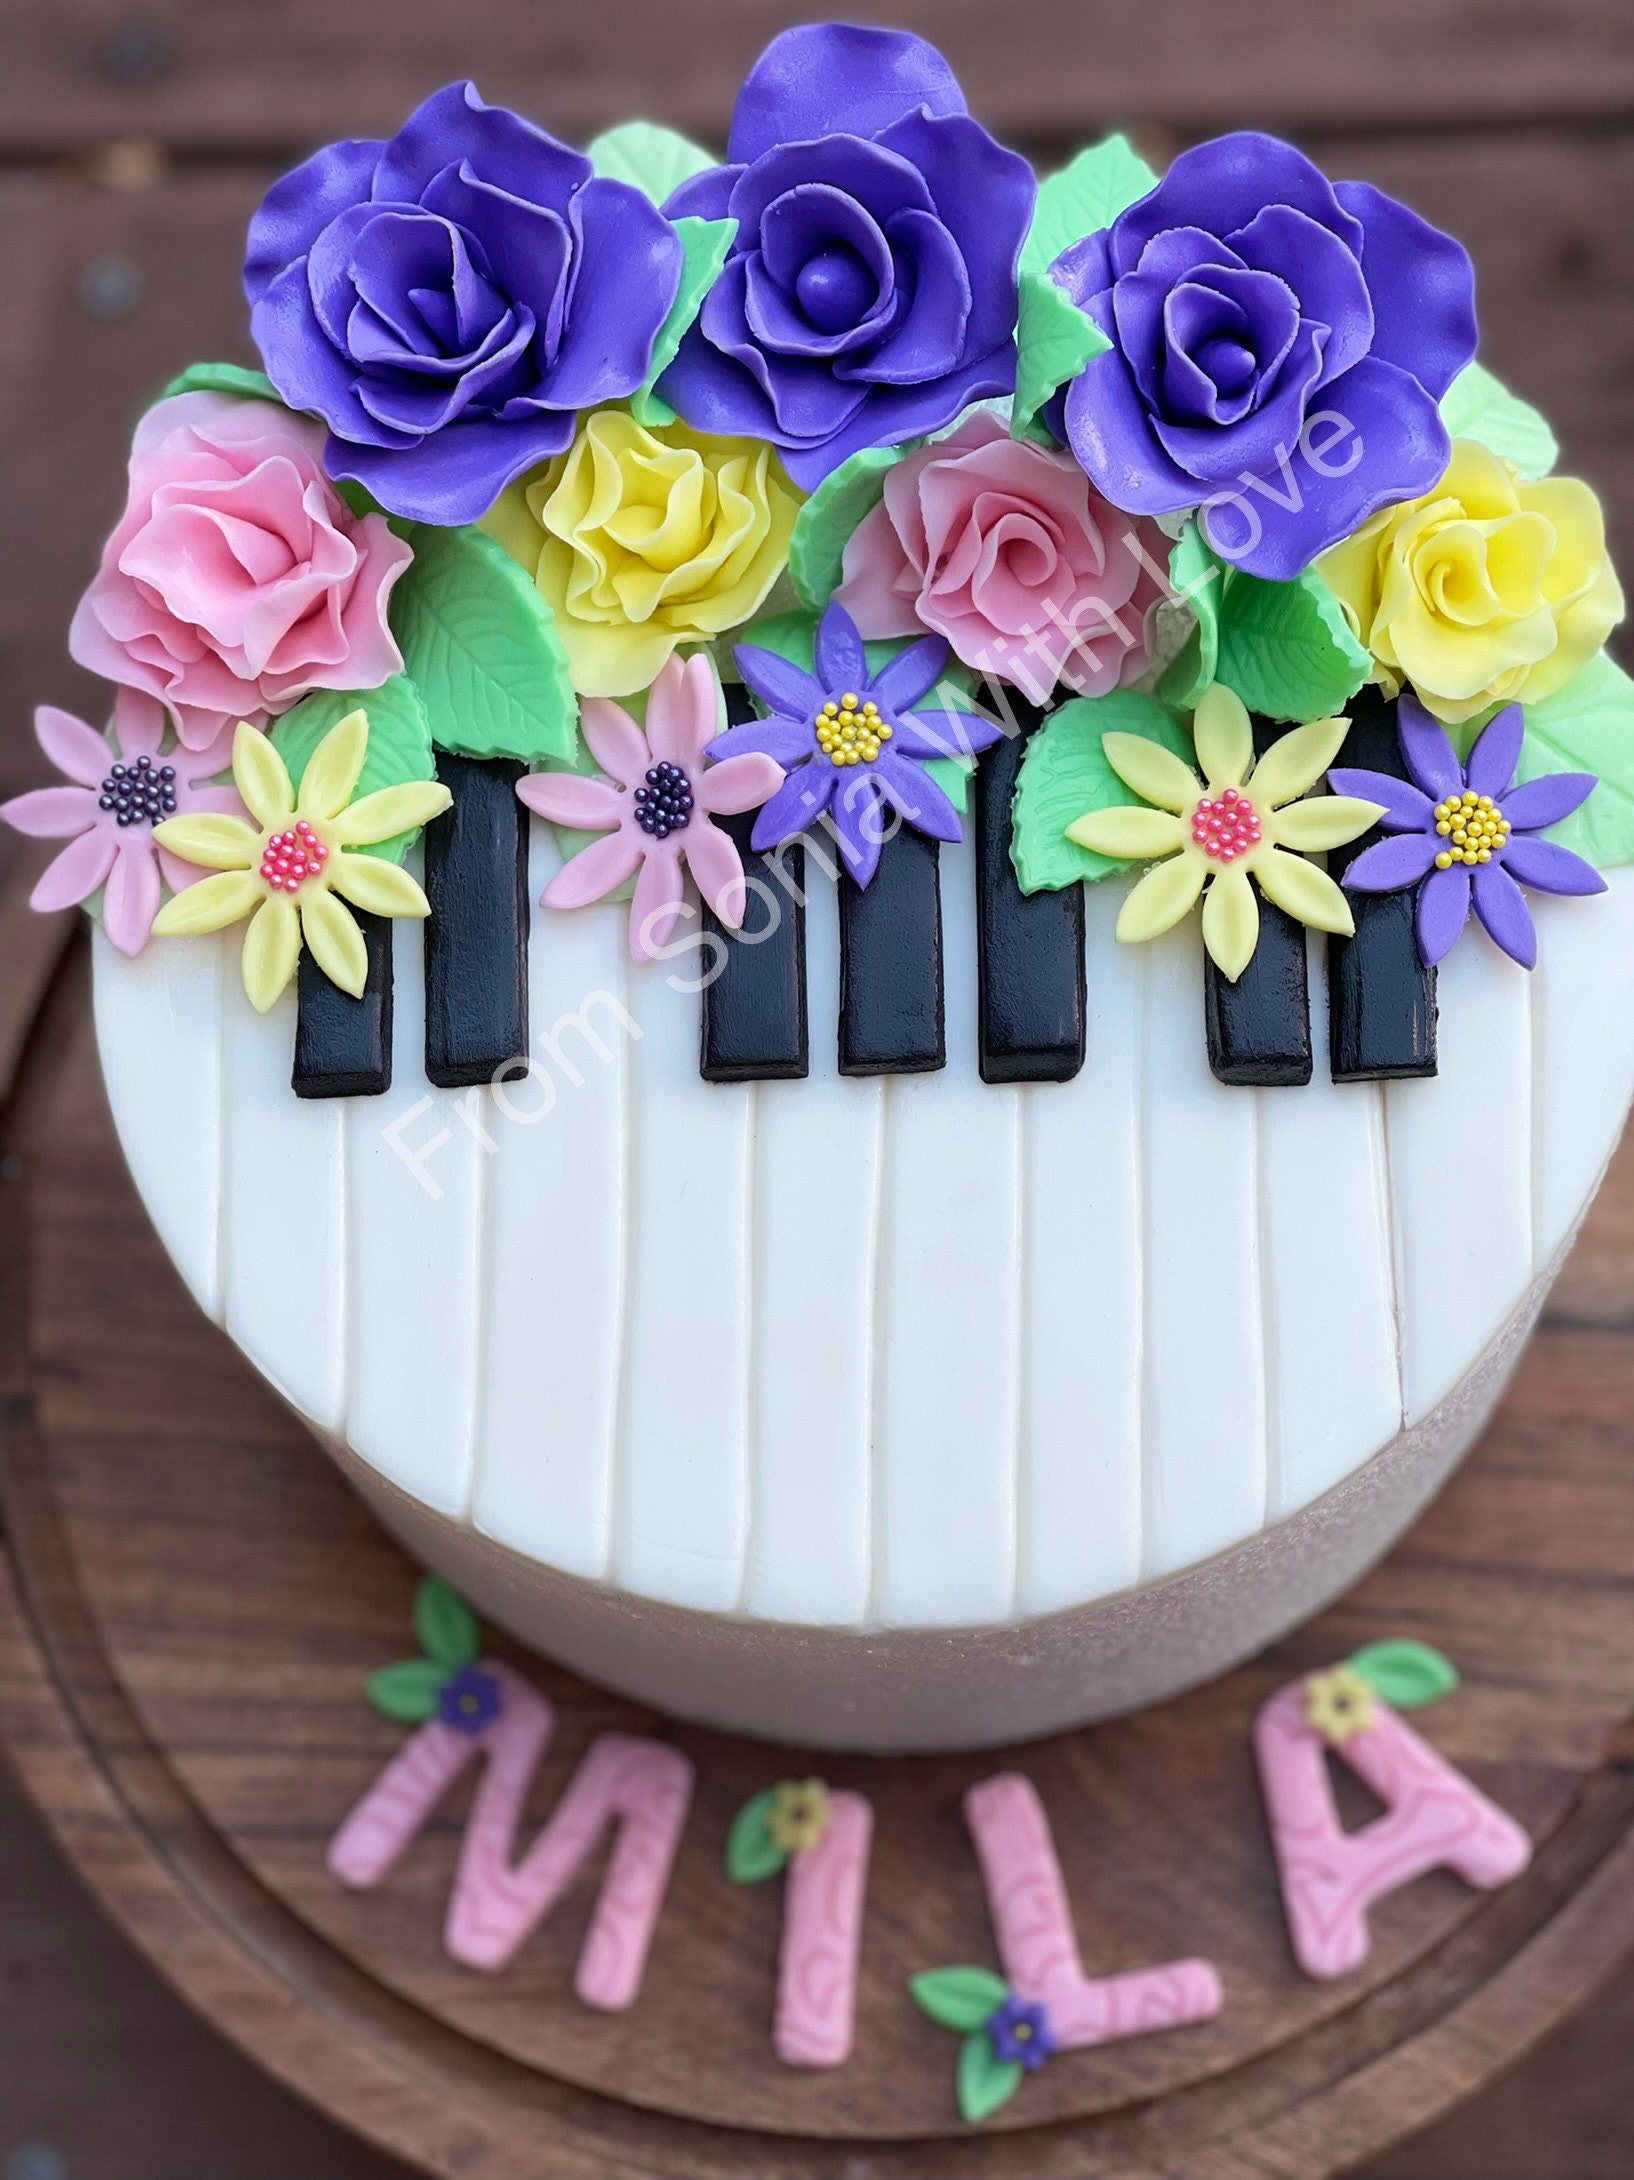 Musical Birthday Party #182Hobbies – Michael Angelo's